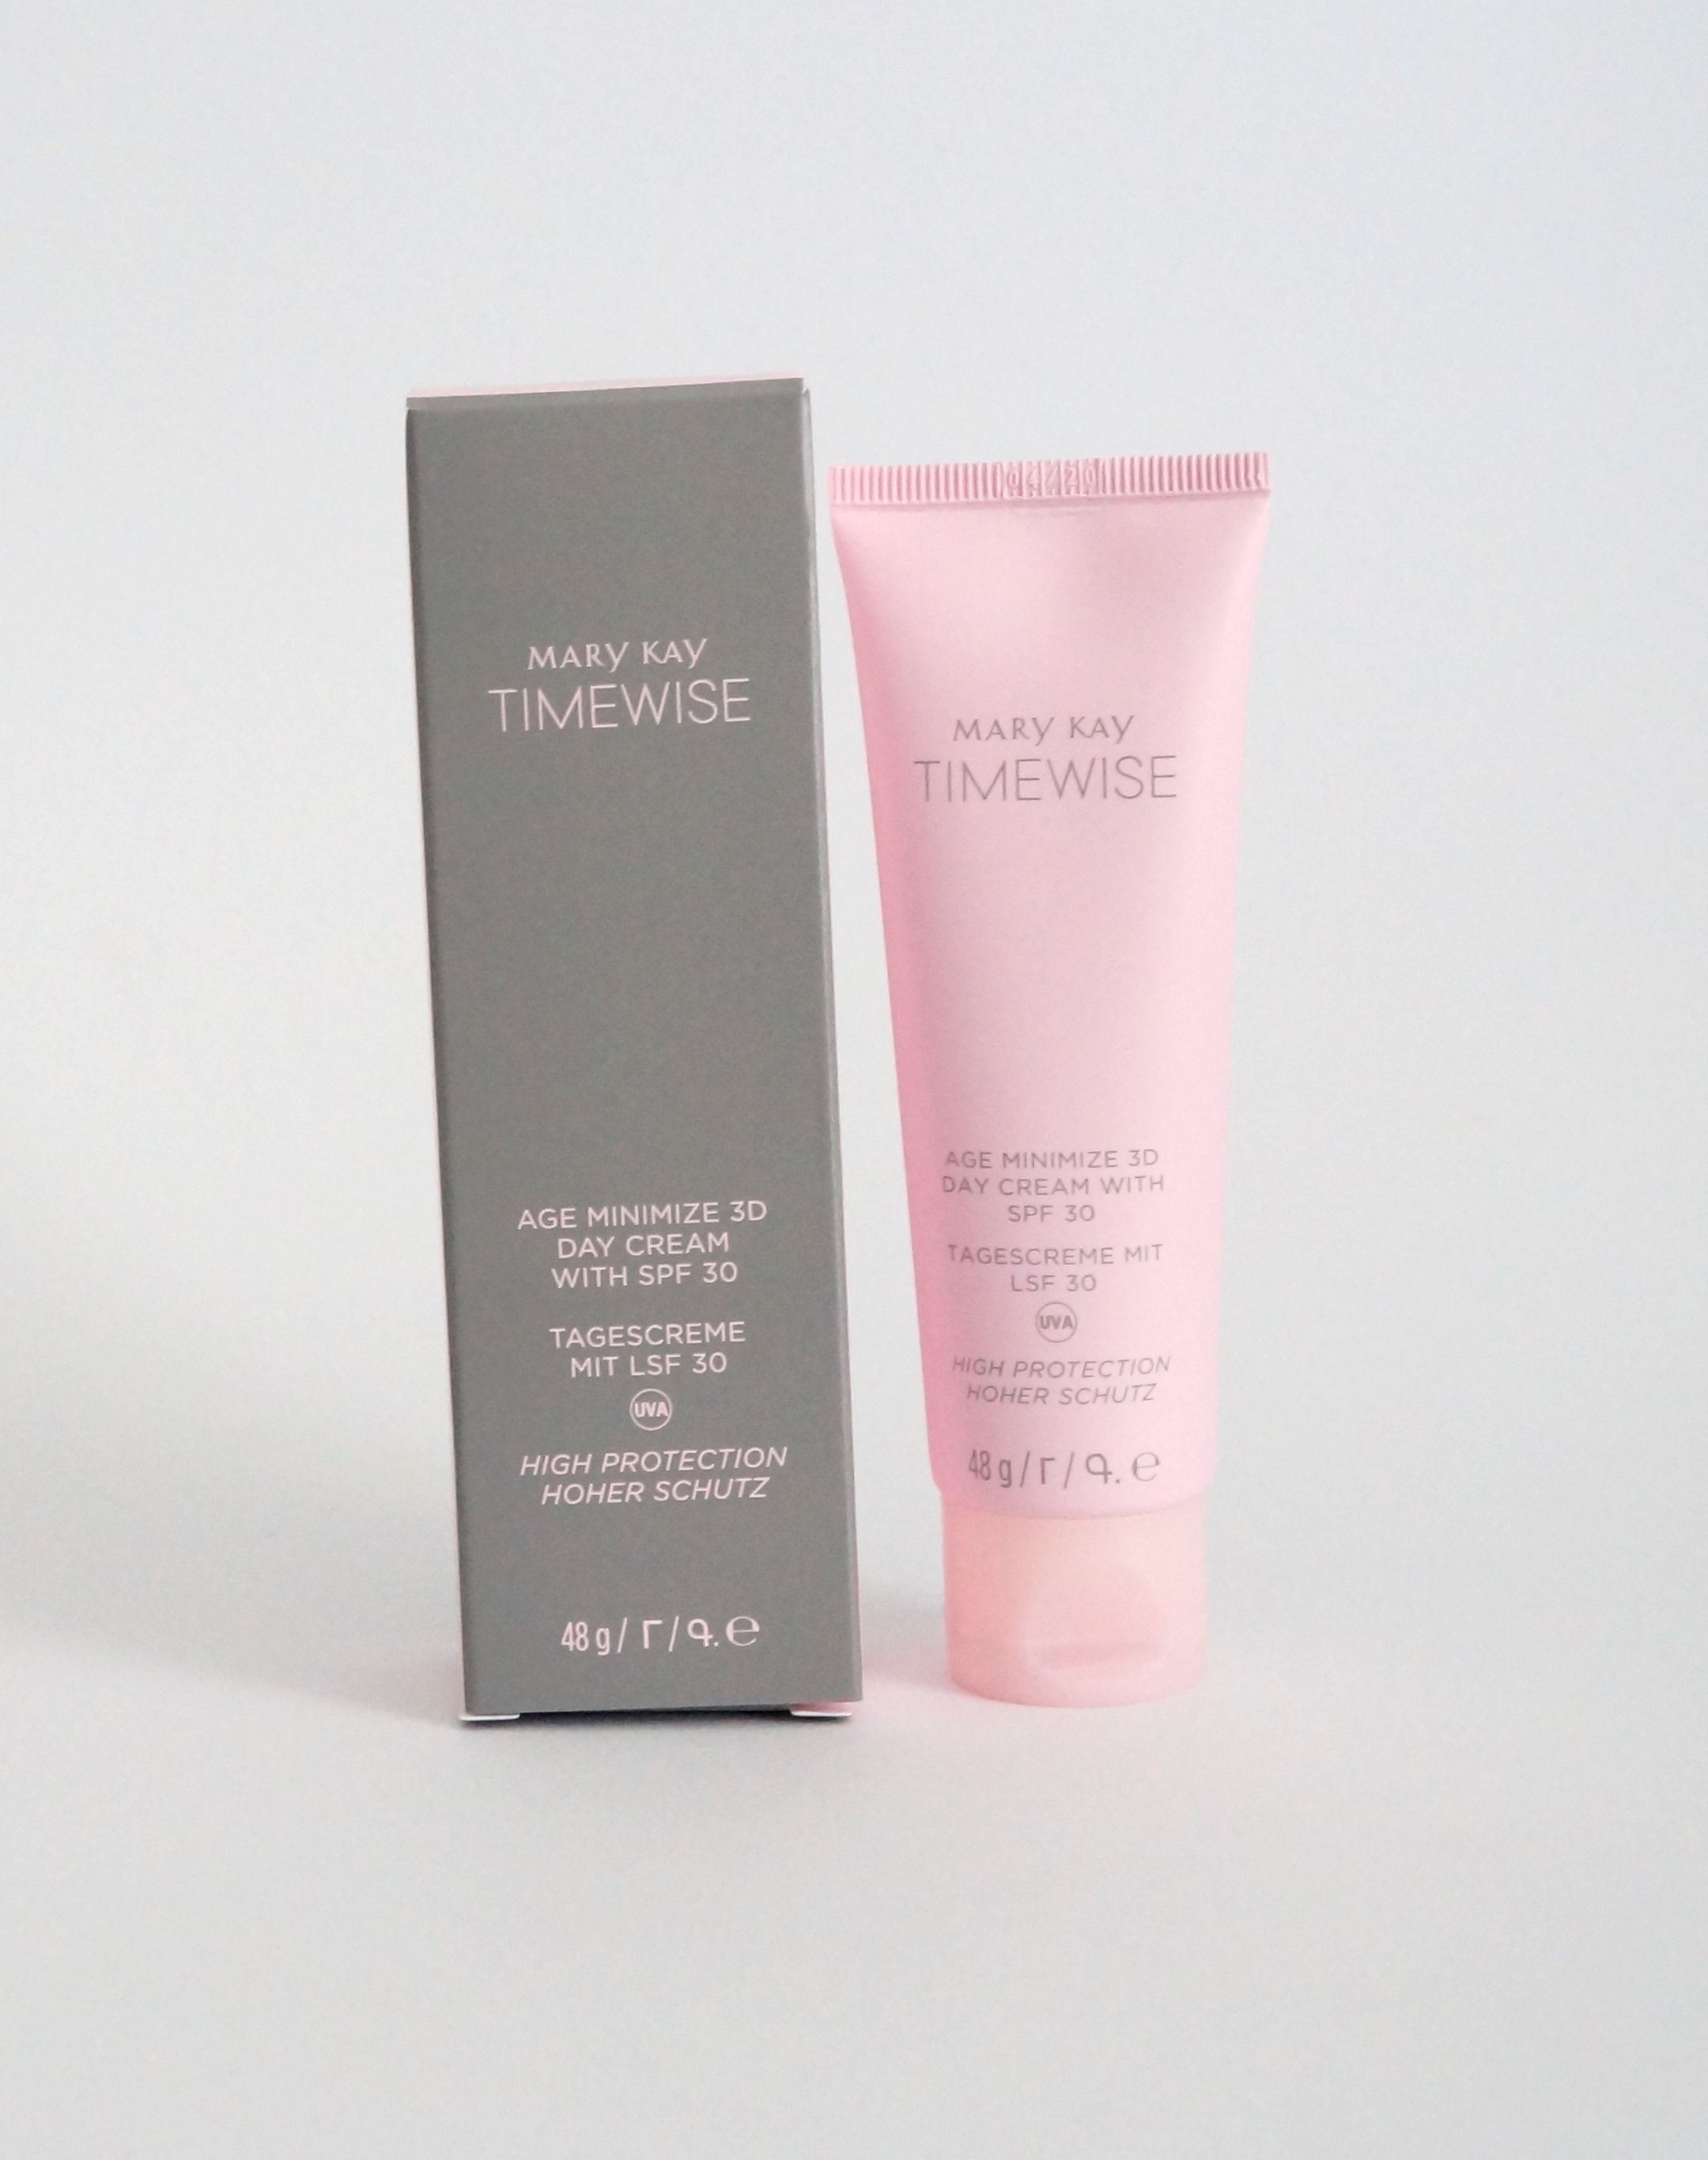 Mary Kay Tagescreme Mary Kay TimeWise Age Minimize 3D Day Cream Tagescreme  mit SPF 30 für Mischhaut / fettige Haut 48g